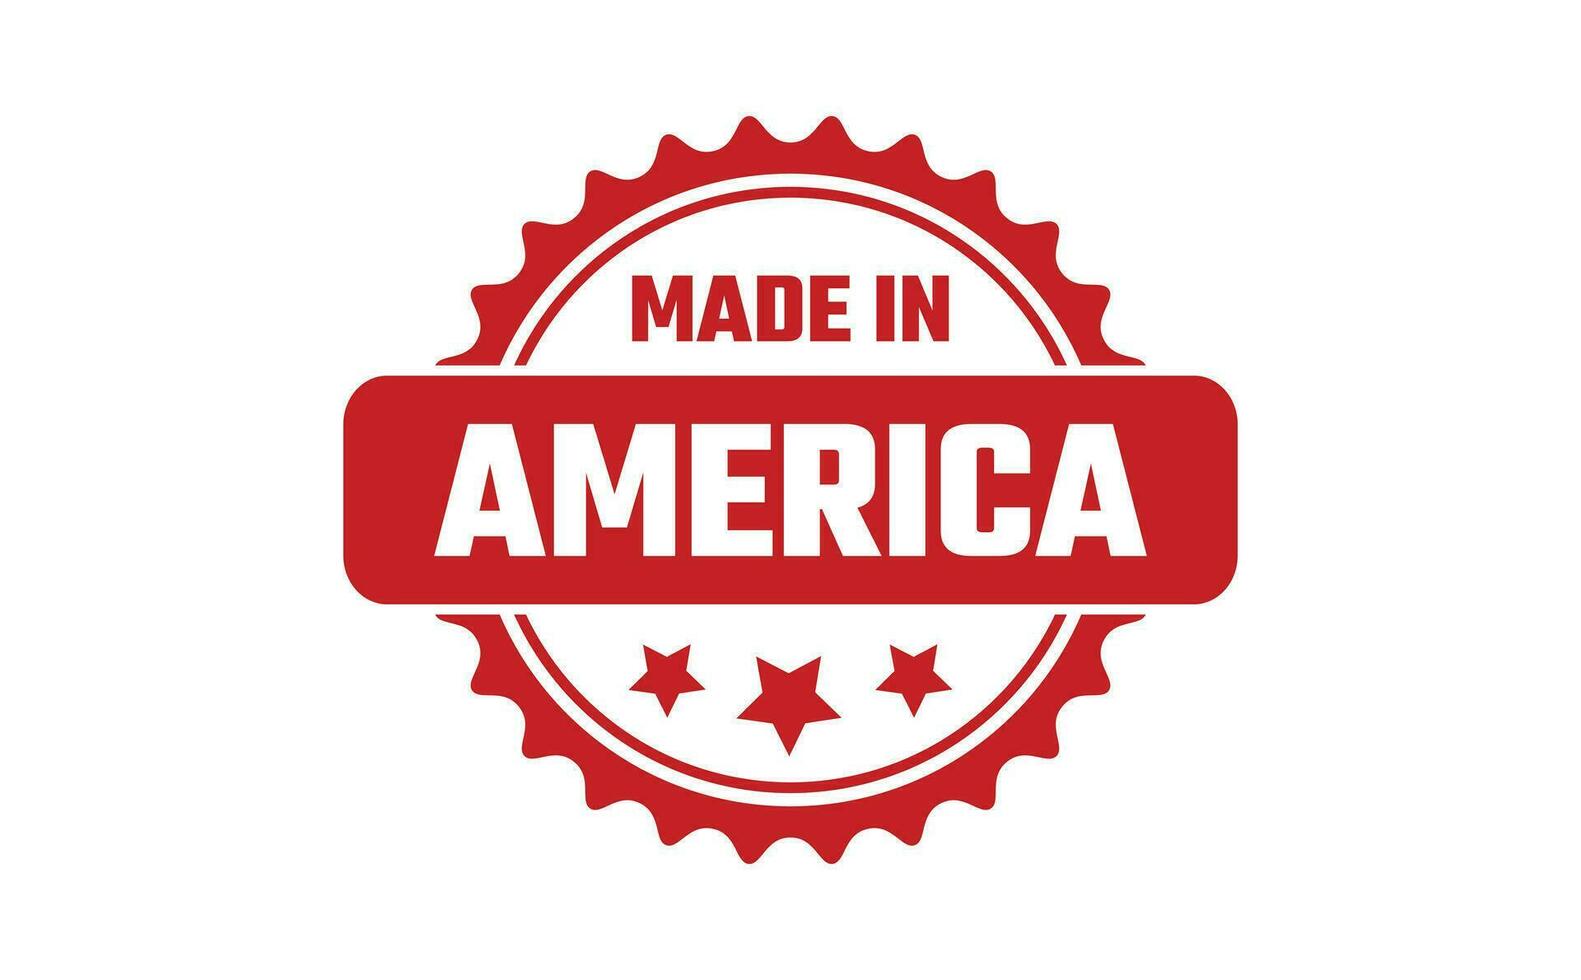 Made In America Rubber Stamp vector